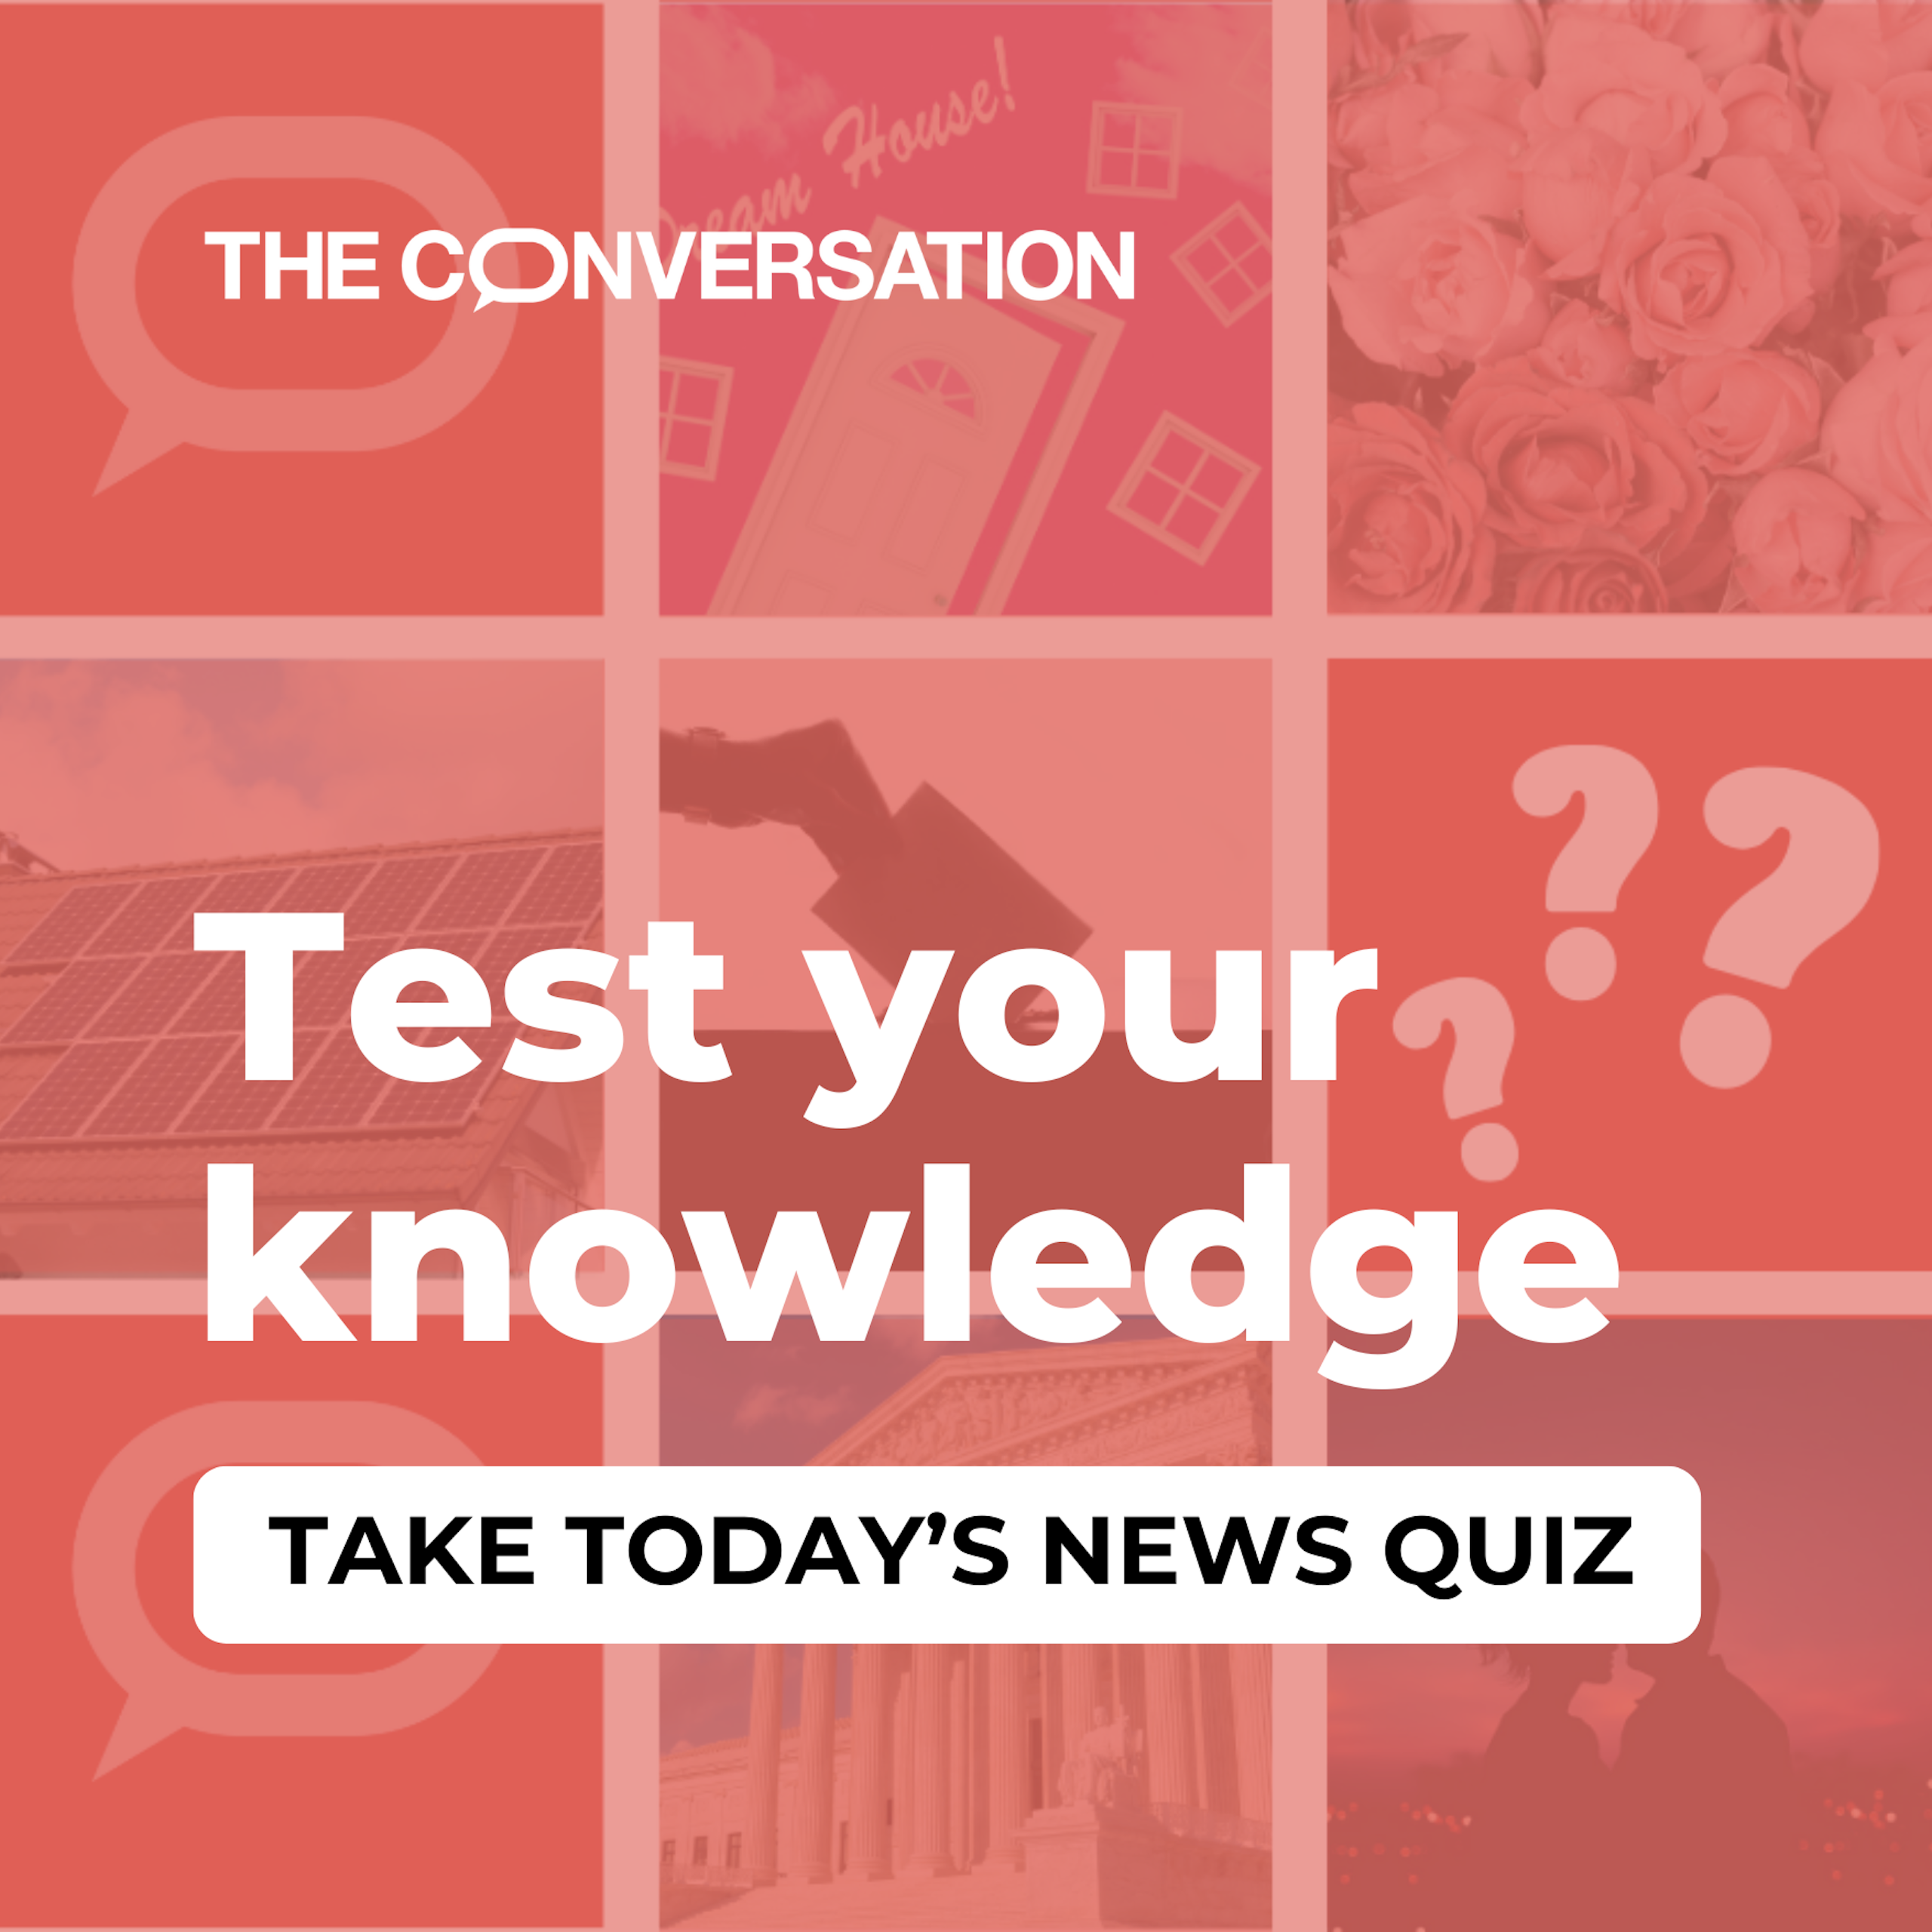 Graphic saying "Test your knowledge" with random images in a grid, including question marks